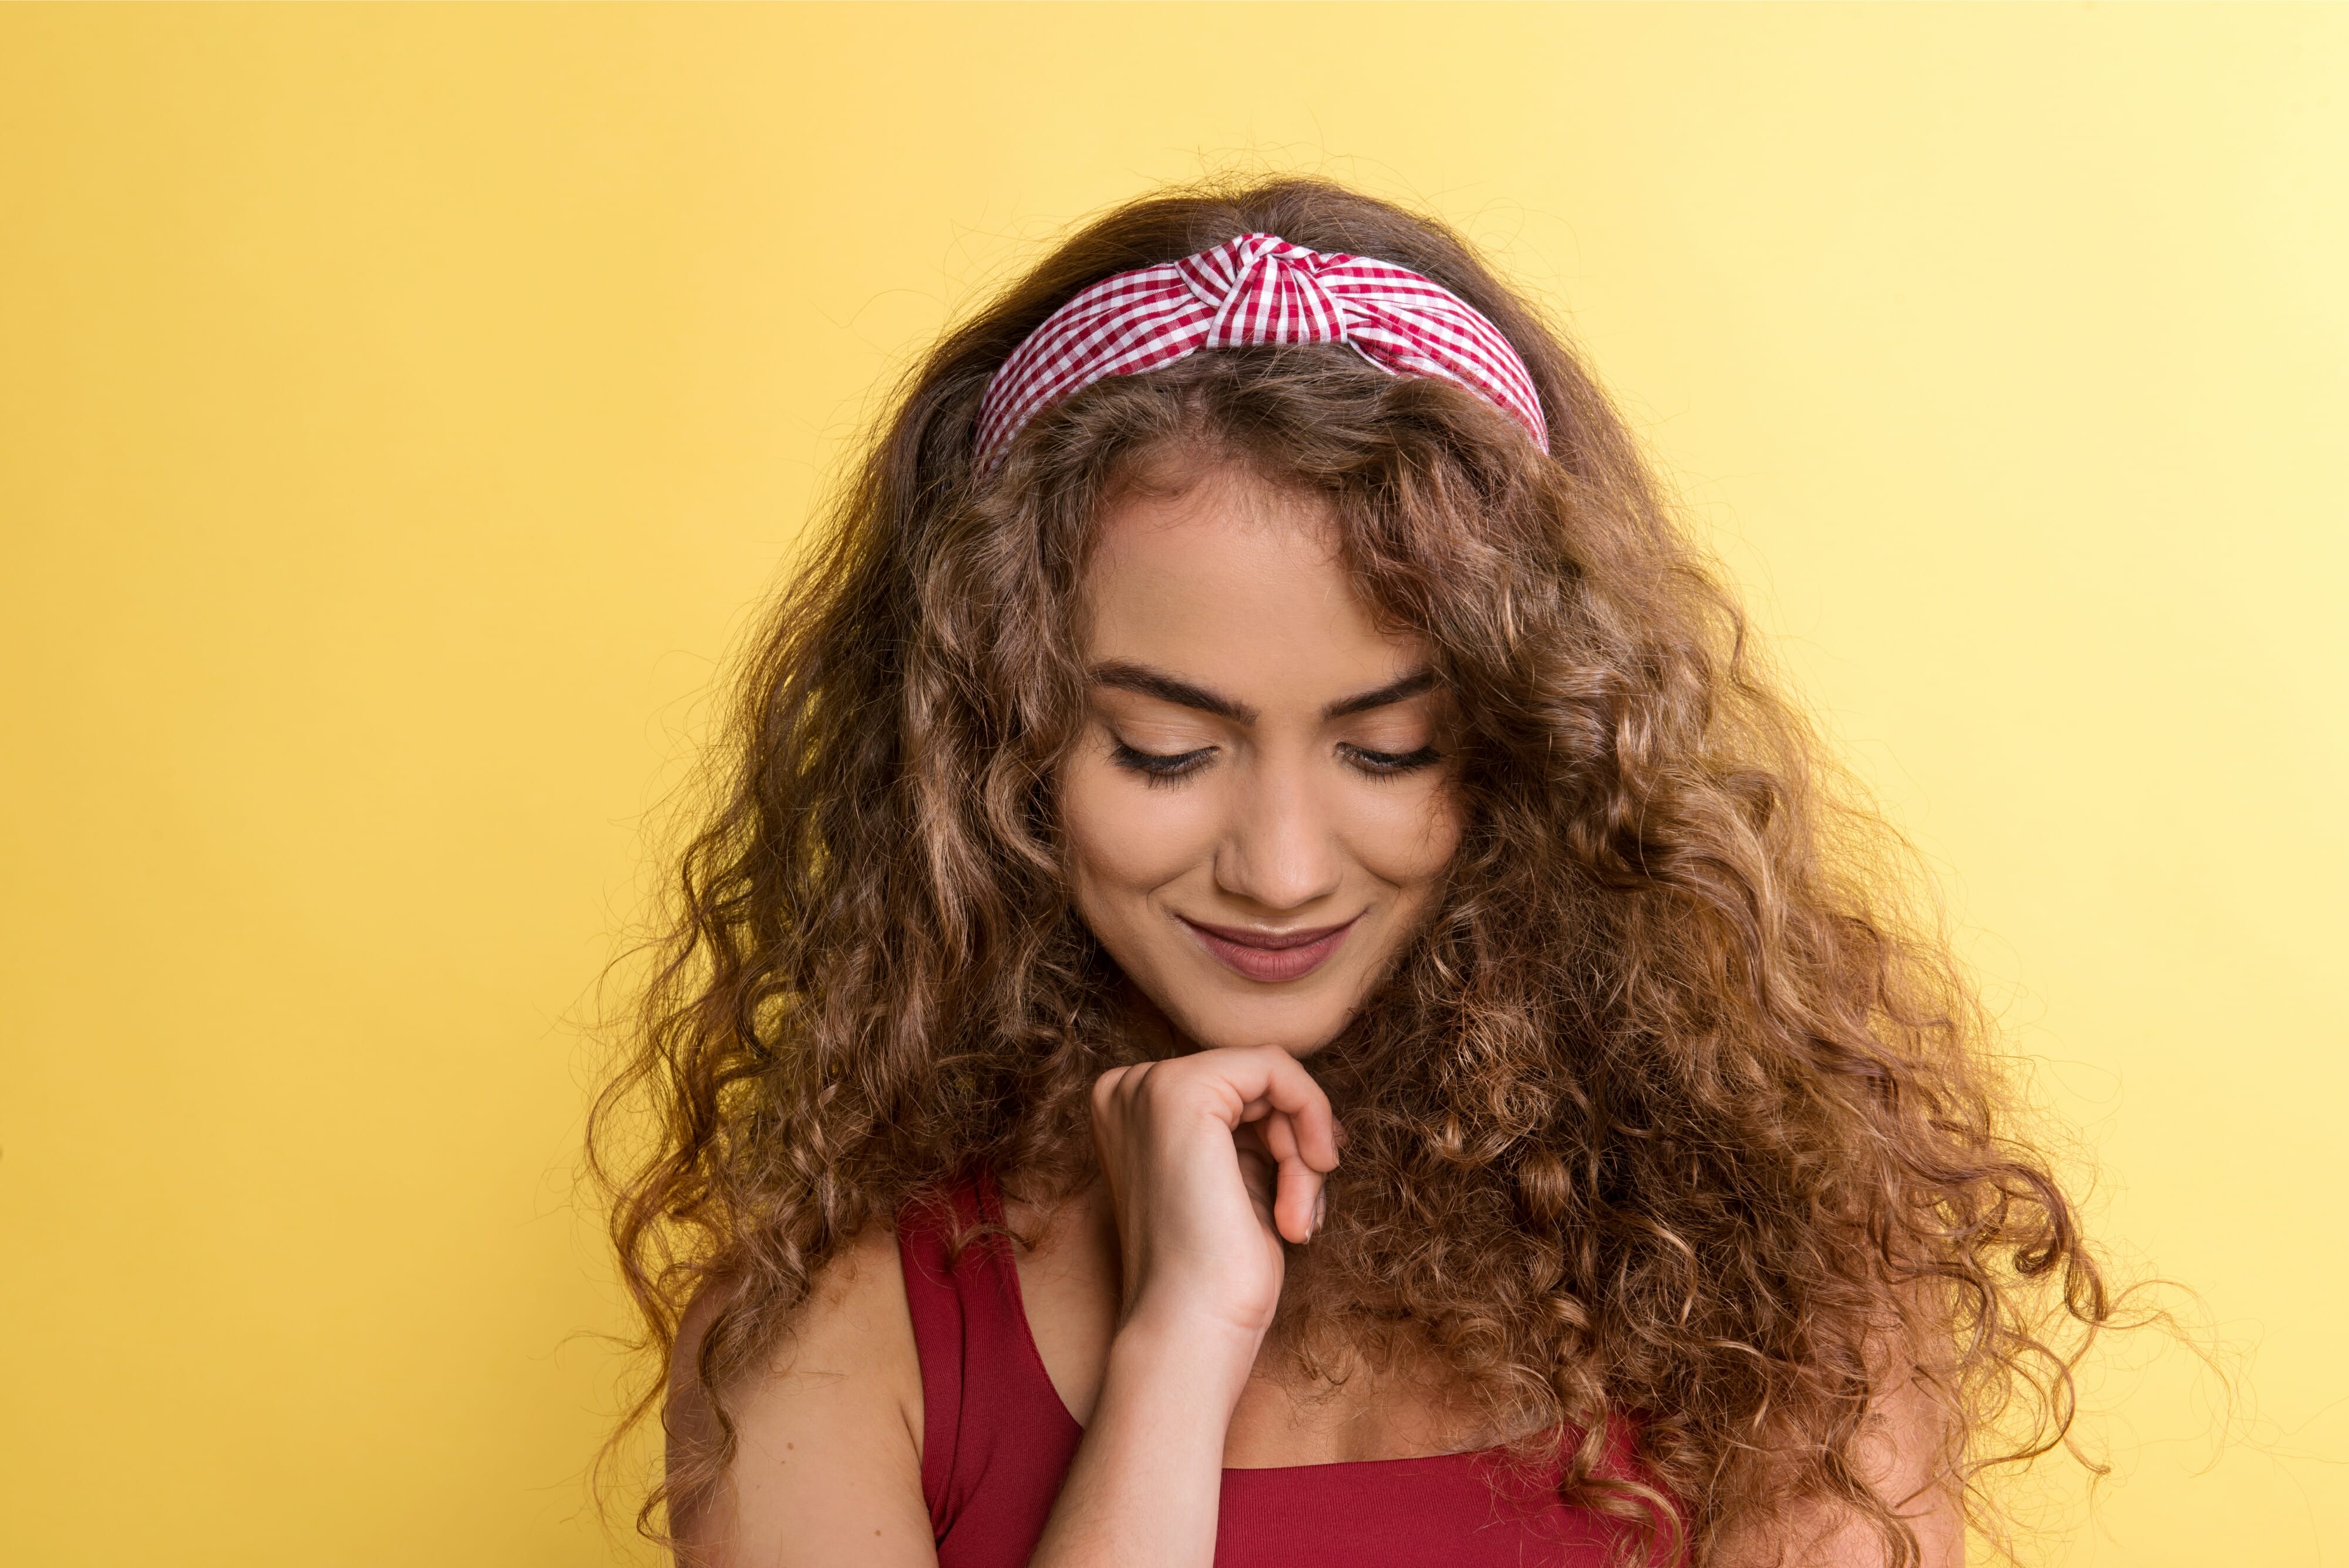 Young woman wearing headband with yellow background